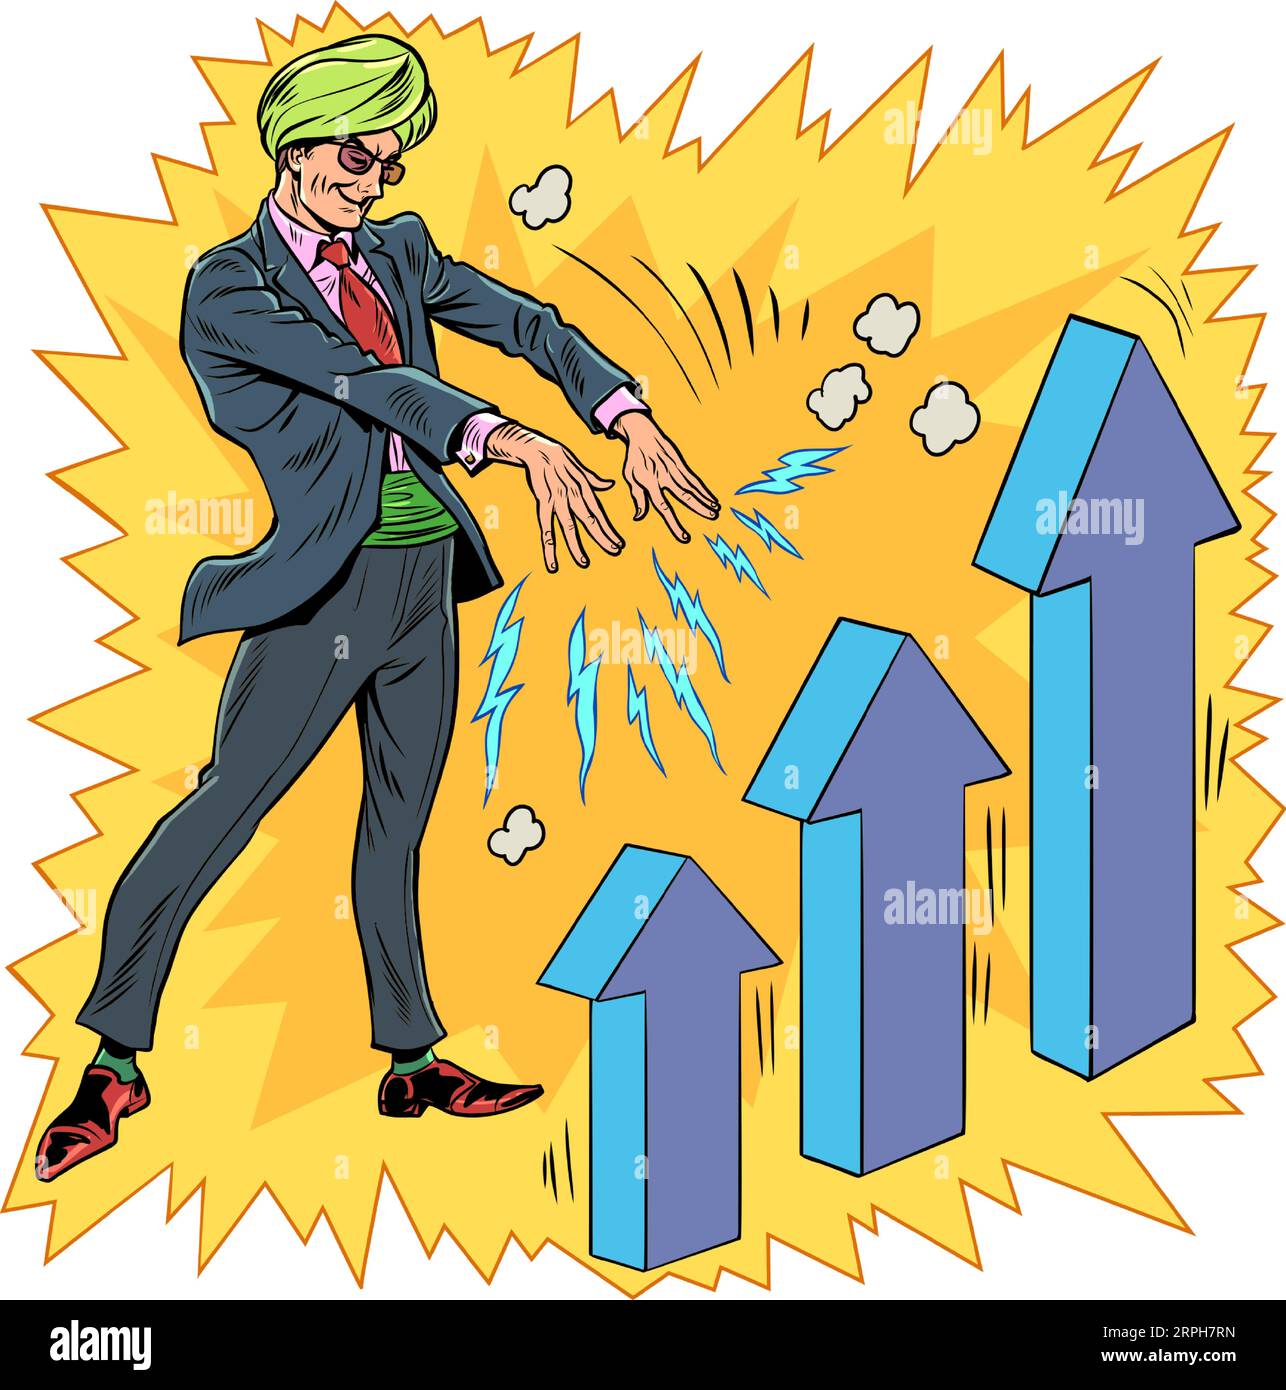 Financial swindlers and sorcerers. Manipulations with stocks and investments. A man in a turban and a suit affects the growth of the graph. Pop Art Stock Vector